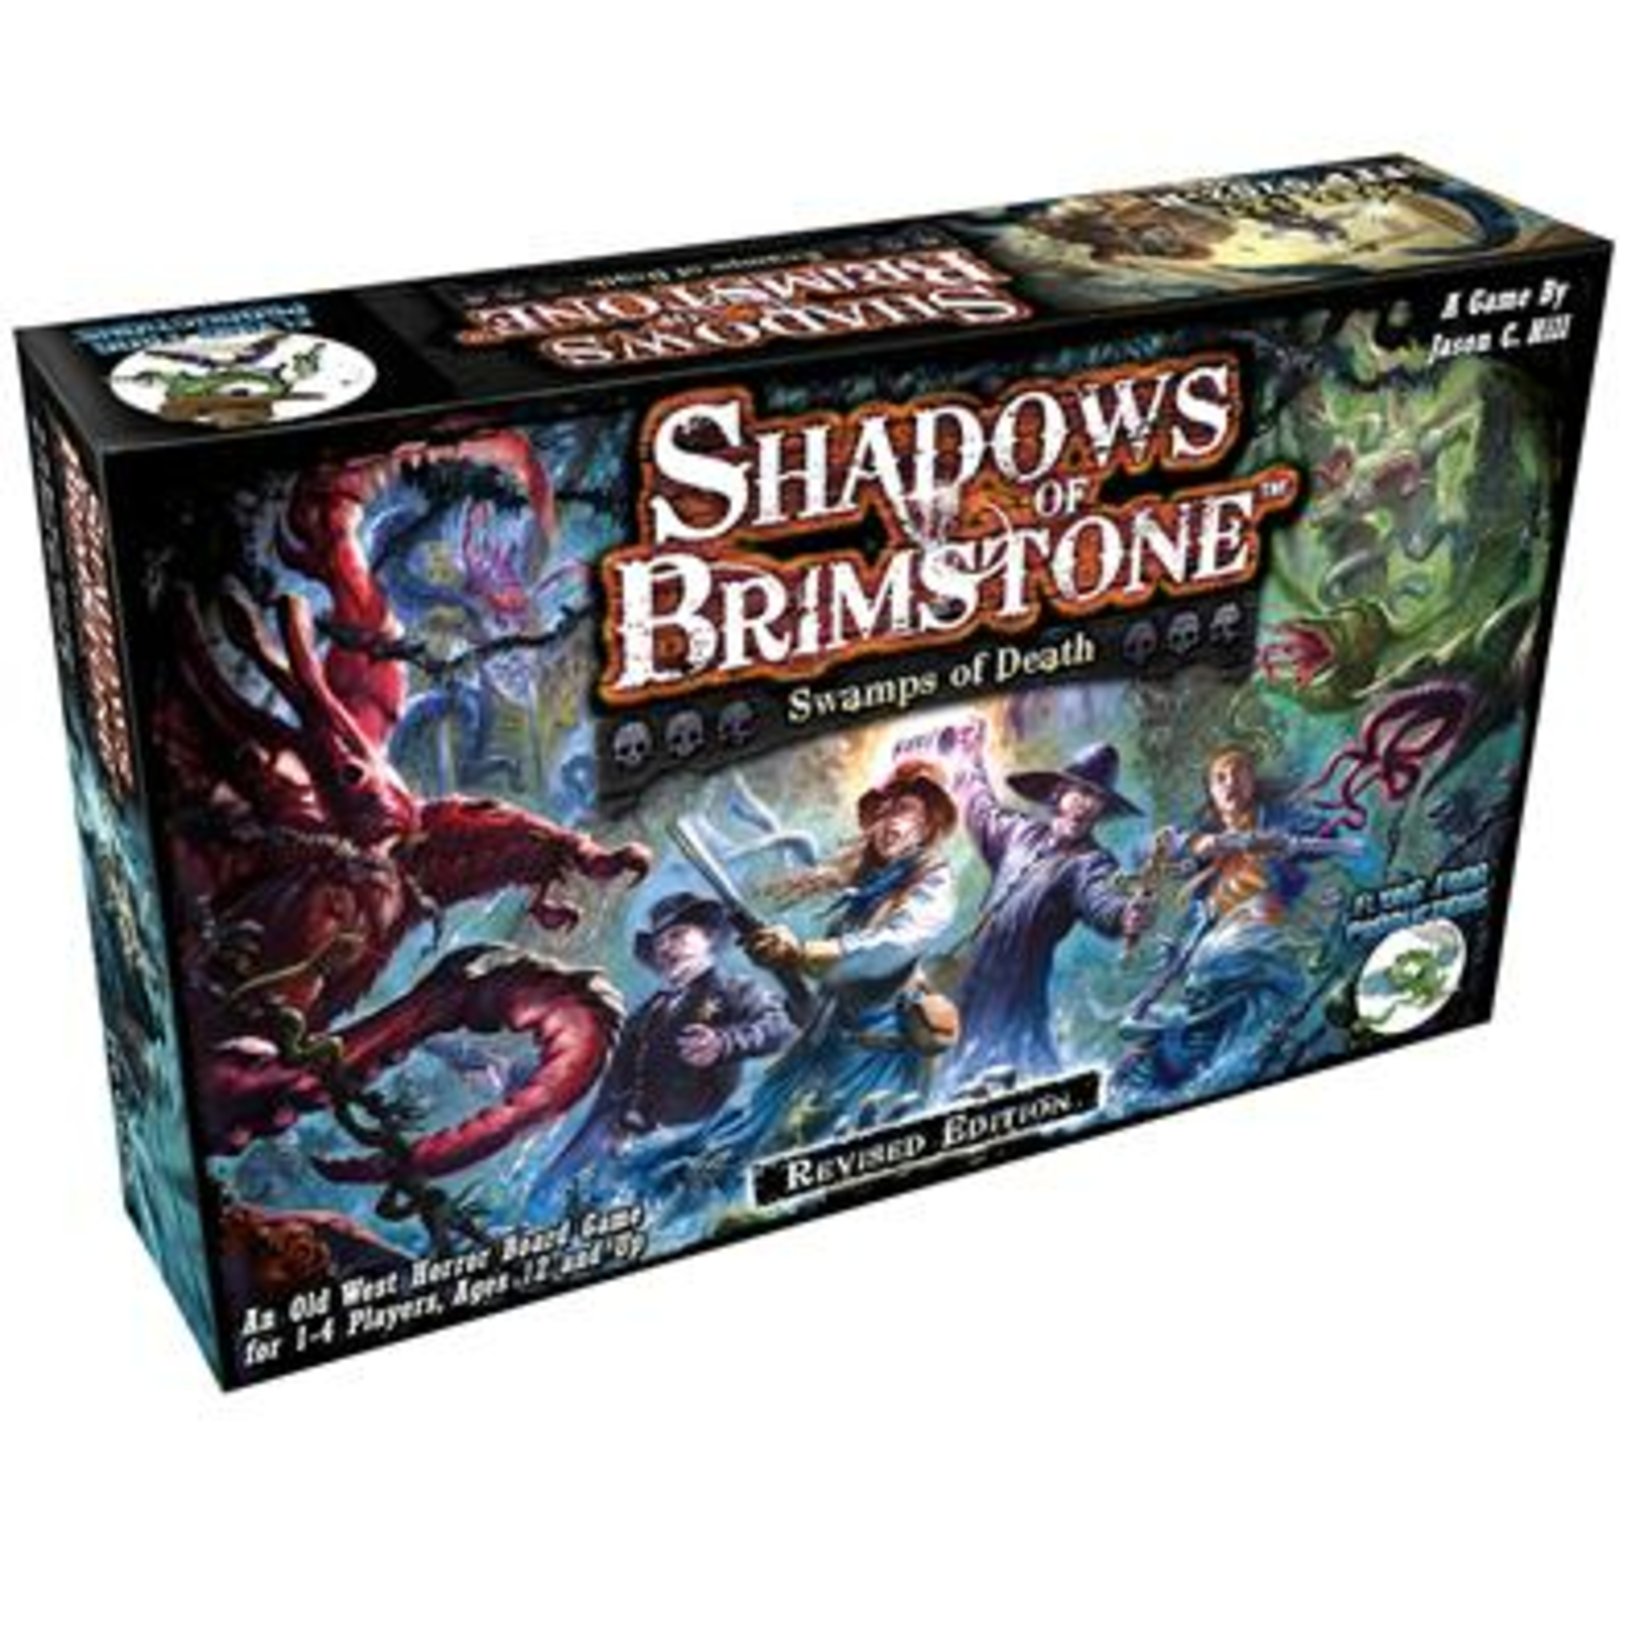 Flying Frog Productions Shadows of Brimstone Swamps of Death Revised Core Set